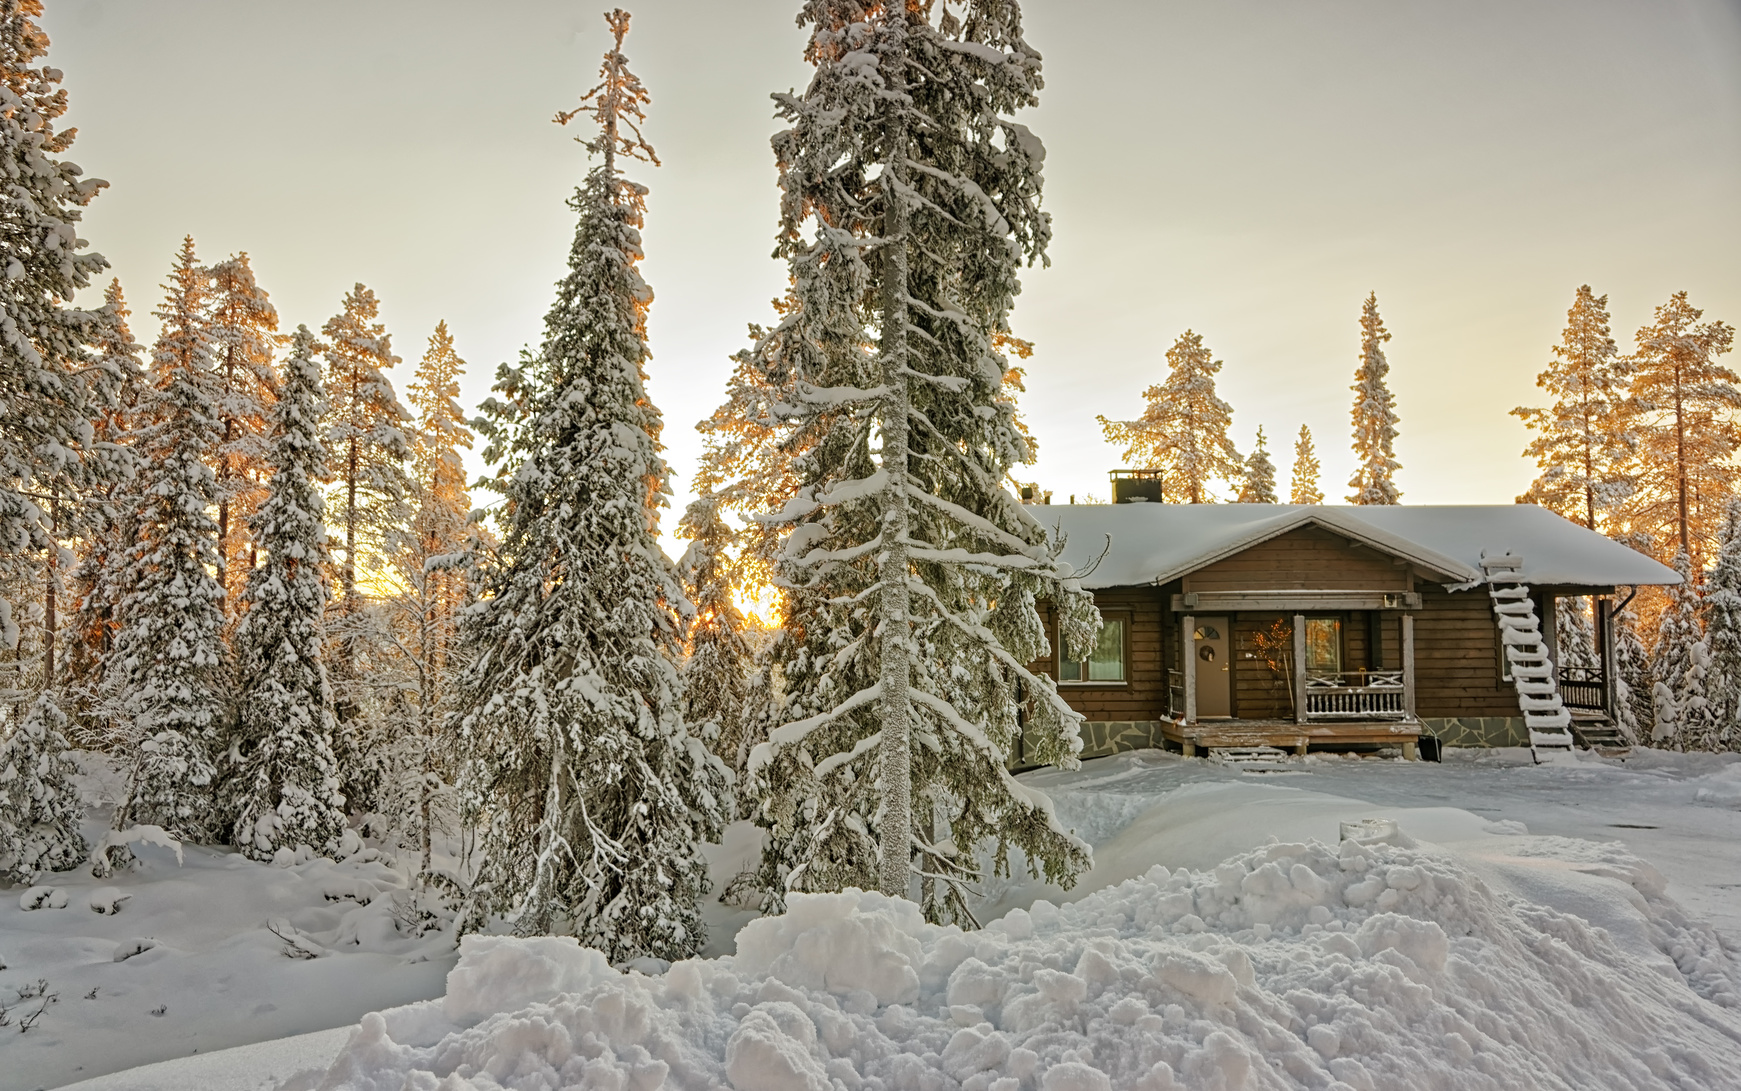 Cottage in snowy winter forest at sunset